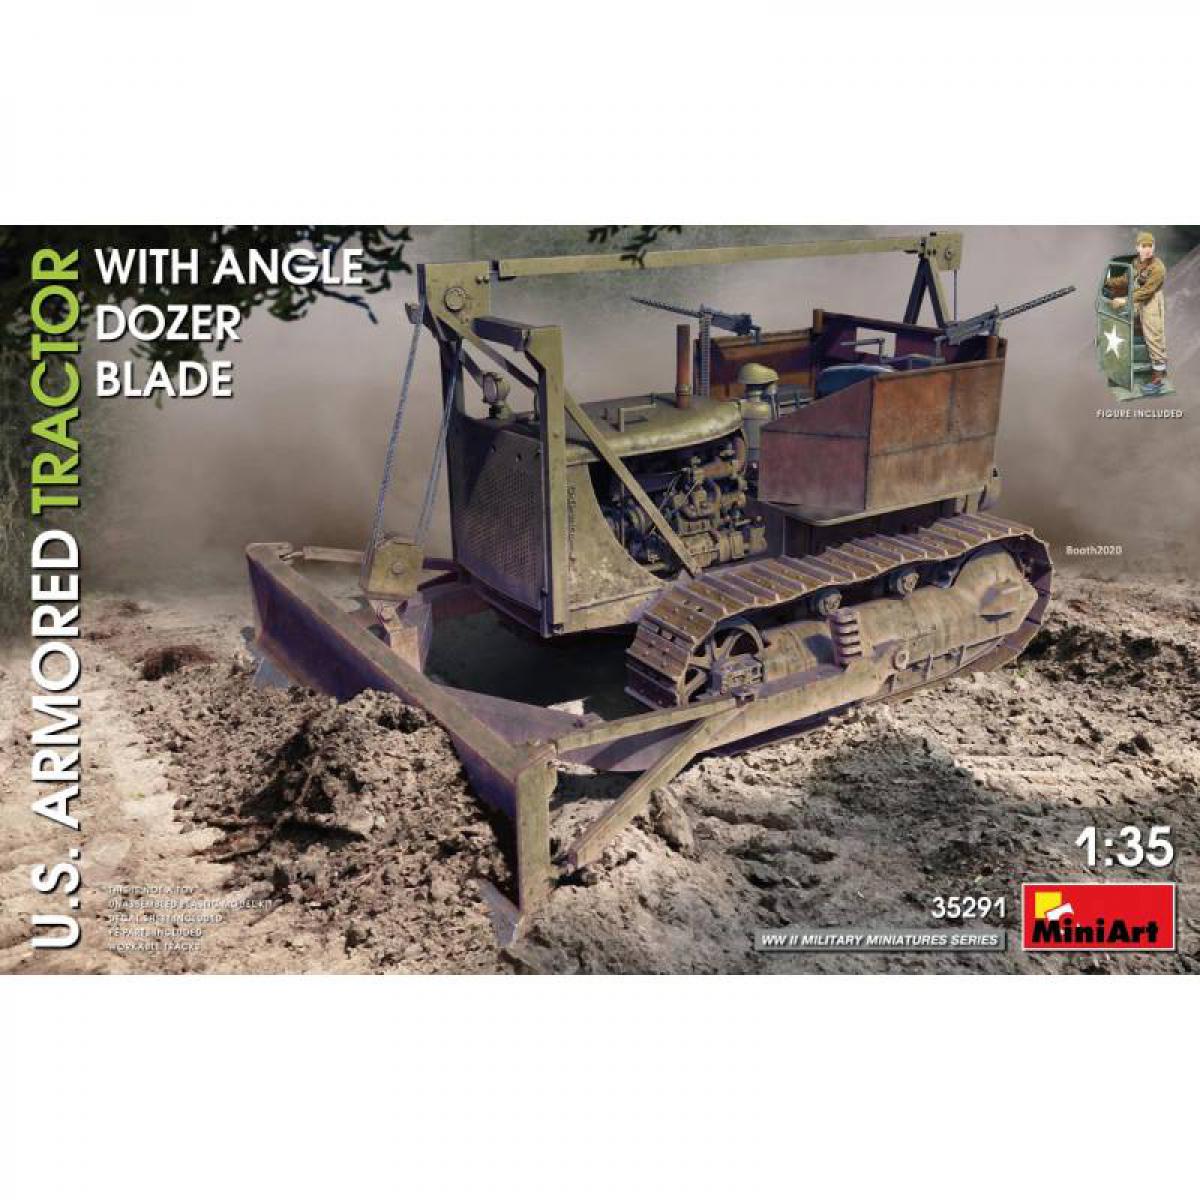 Mini Art - Maquette Véhicule U.s. Armored Tractor With Angle Dozer Blade - Chars